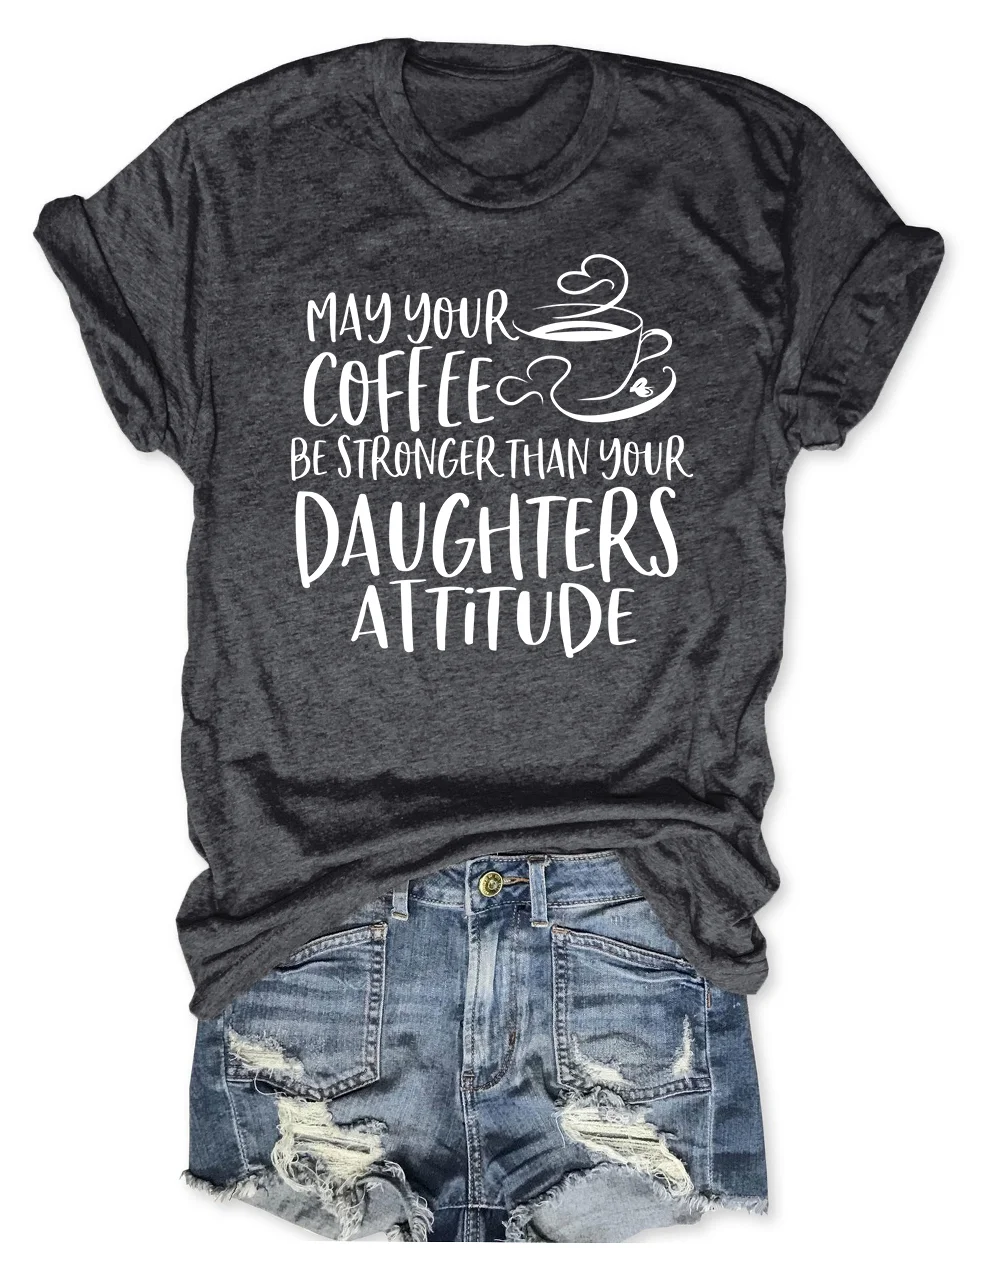 May Your Coffee Be Stronger Than Your Daughter's Attitude T-Shirt